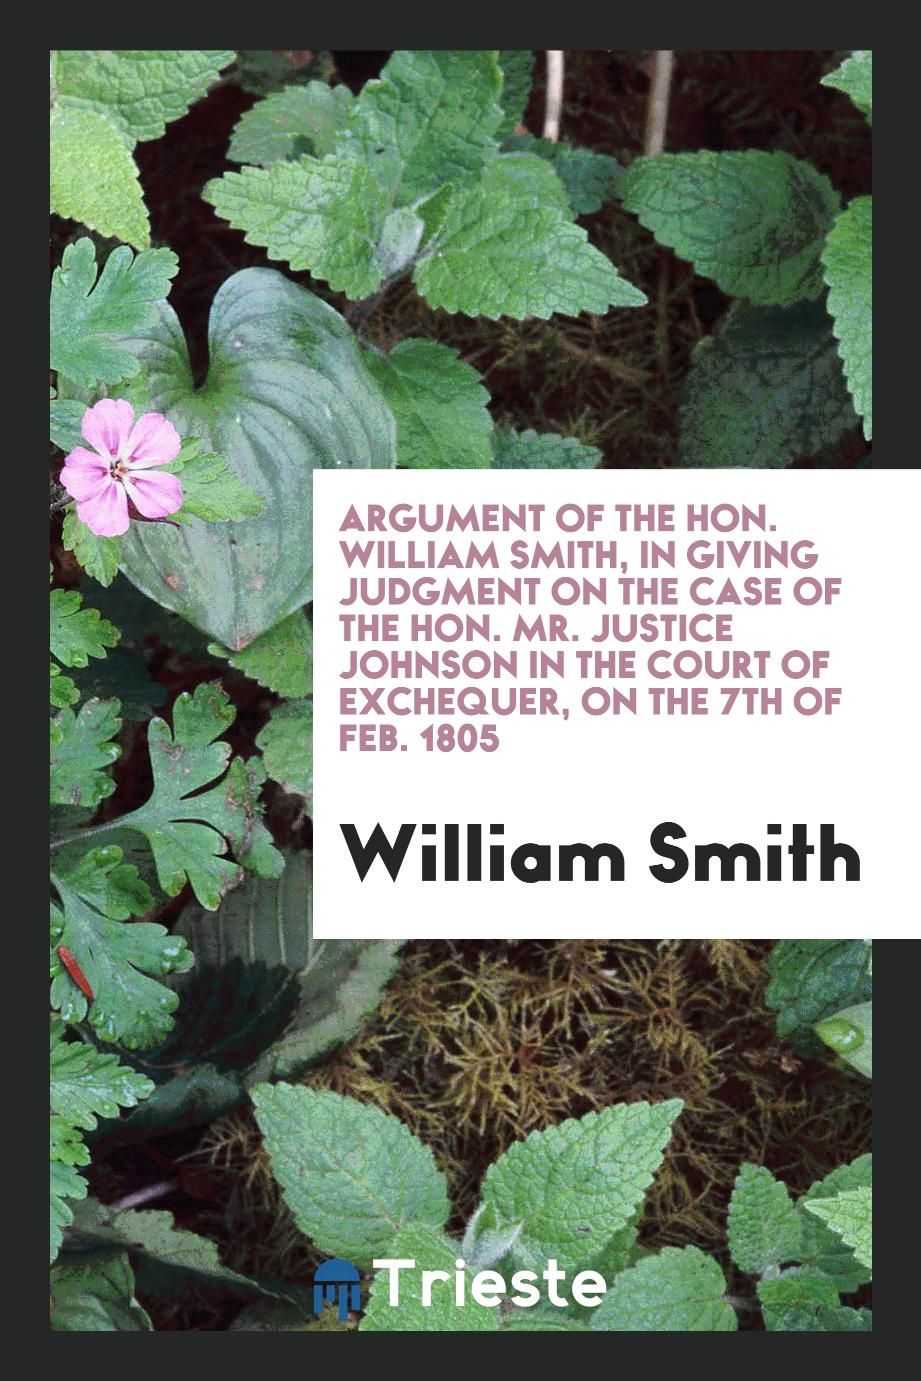 Argument of the Hon. William Smith, in Giving Judgment on the Case of the Hon. Mr. Justice Johnson in the Court of Exchequer, on the 7th of Feb. 1805